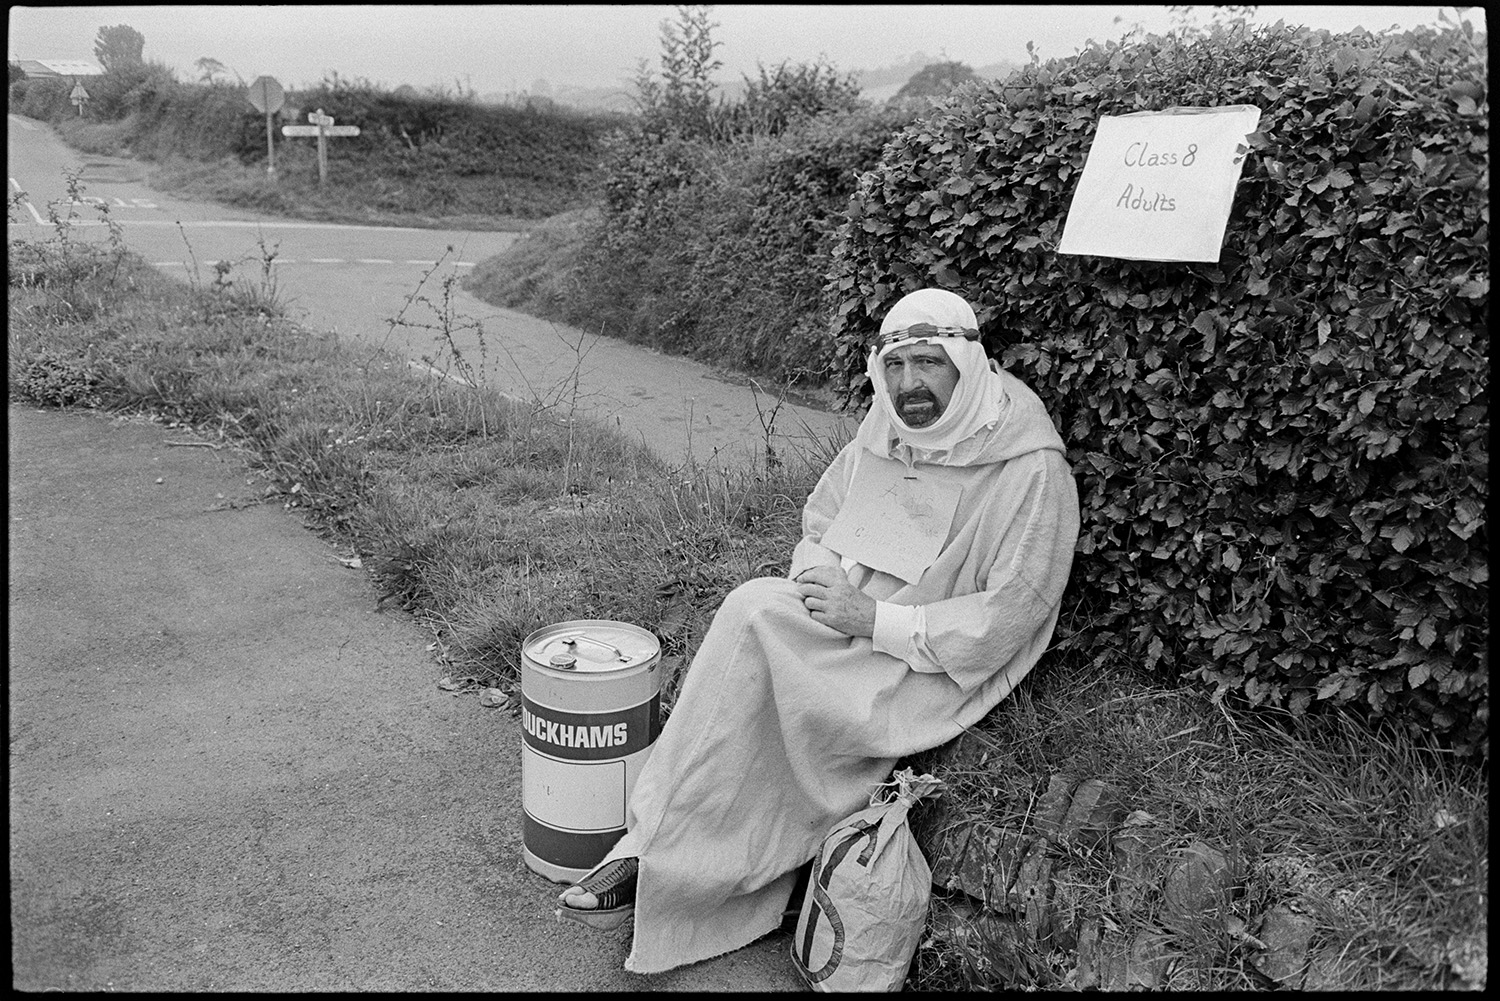 Fancy dress preparations, queen and attendants preparing for parade with brass band. 
[A man in fancy dress as an oil sheik wearing a robe or thawb. He is sat by a roadside with a round tin and a sack with a dollar sign drawn onto it, at Chulmleigh Fair.]